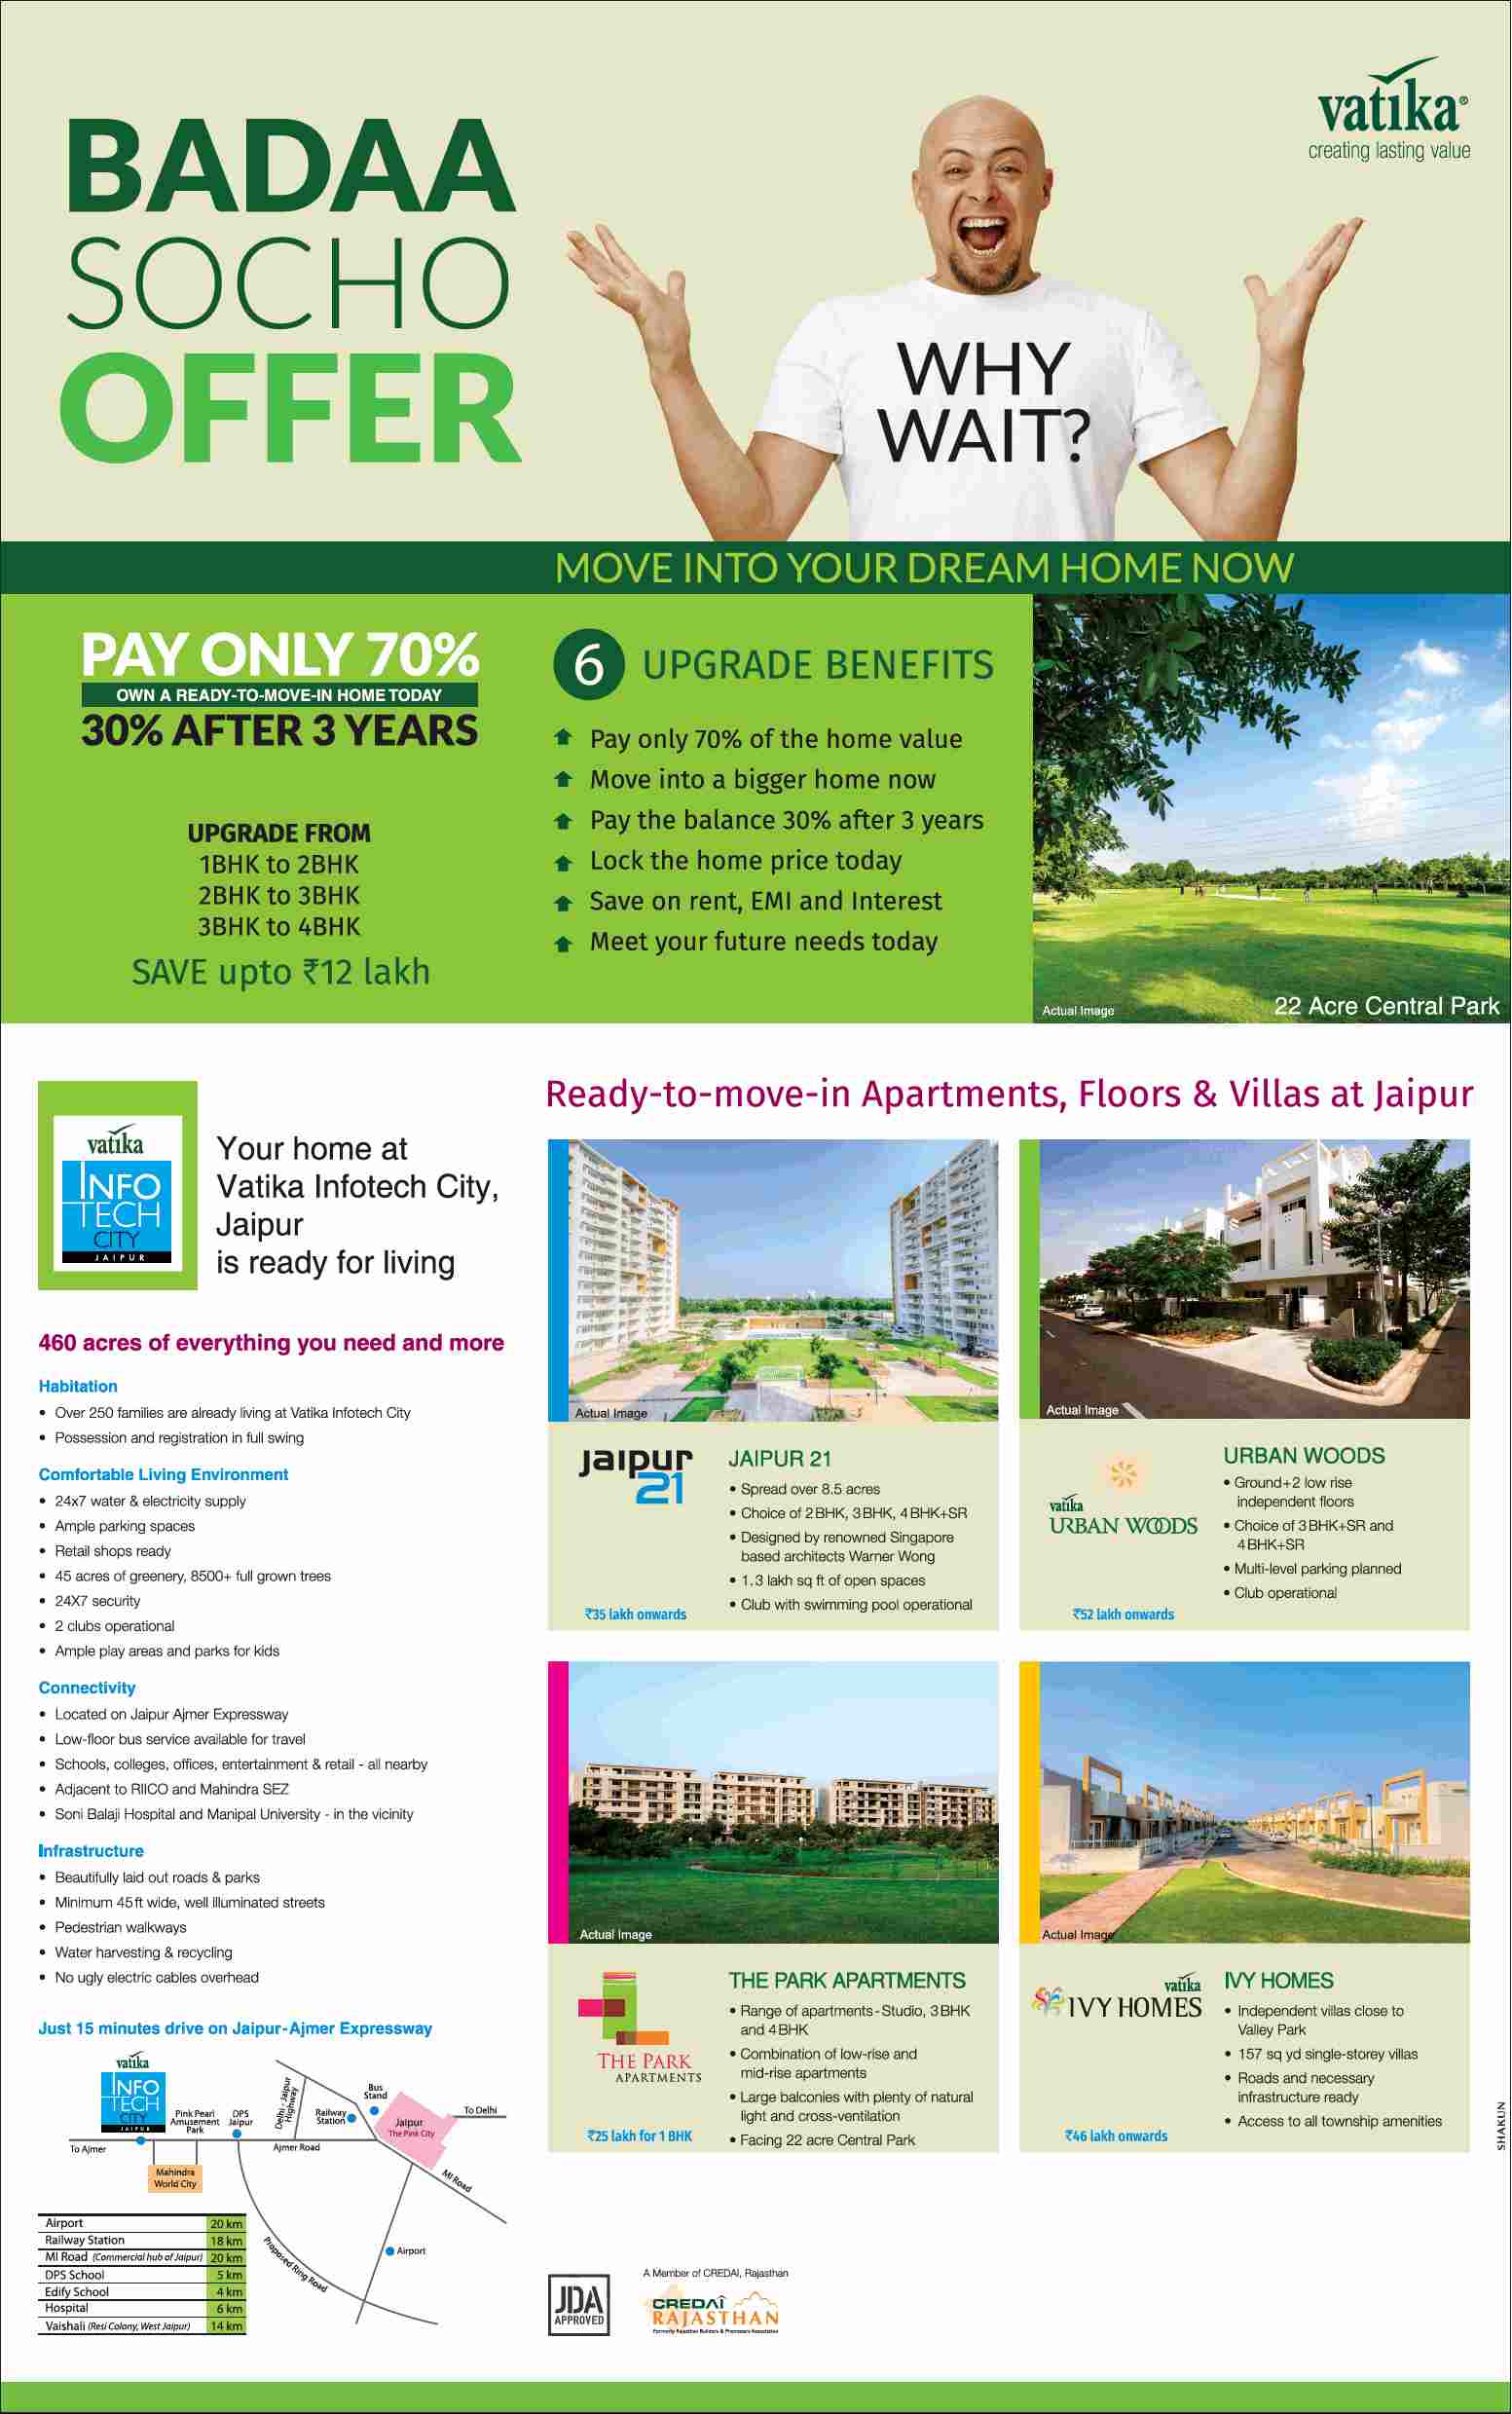 Pay only 70% and rest 30% after 3 years at Vatika properties in Jaipur